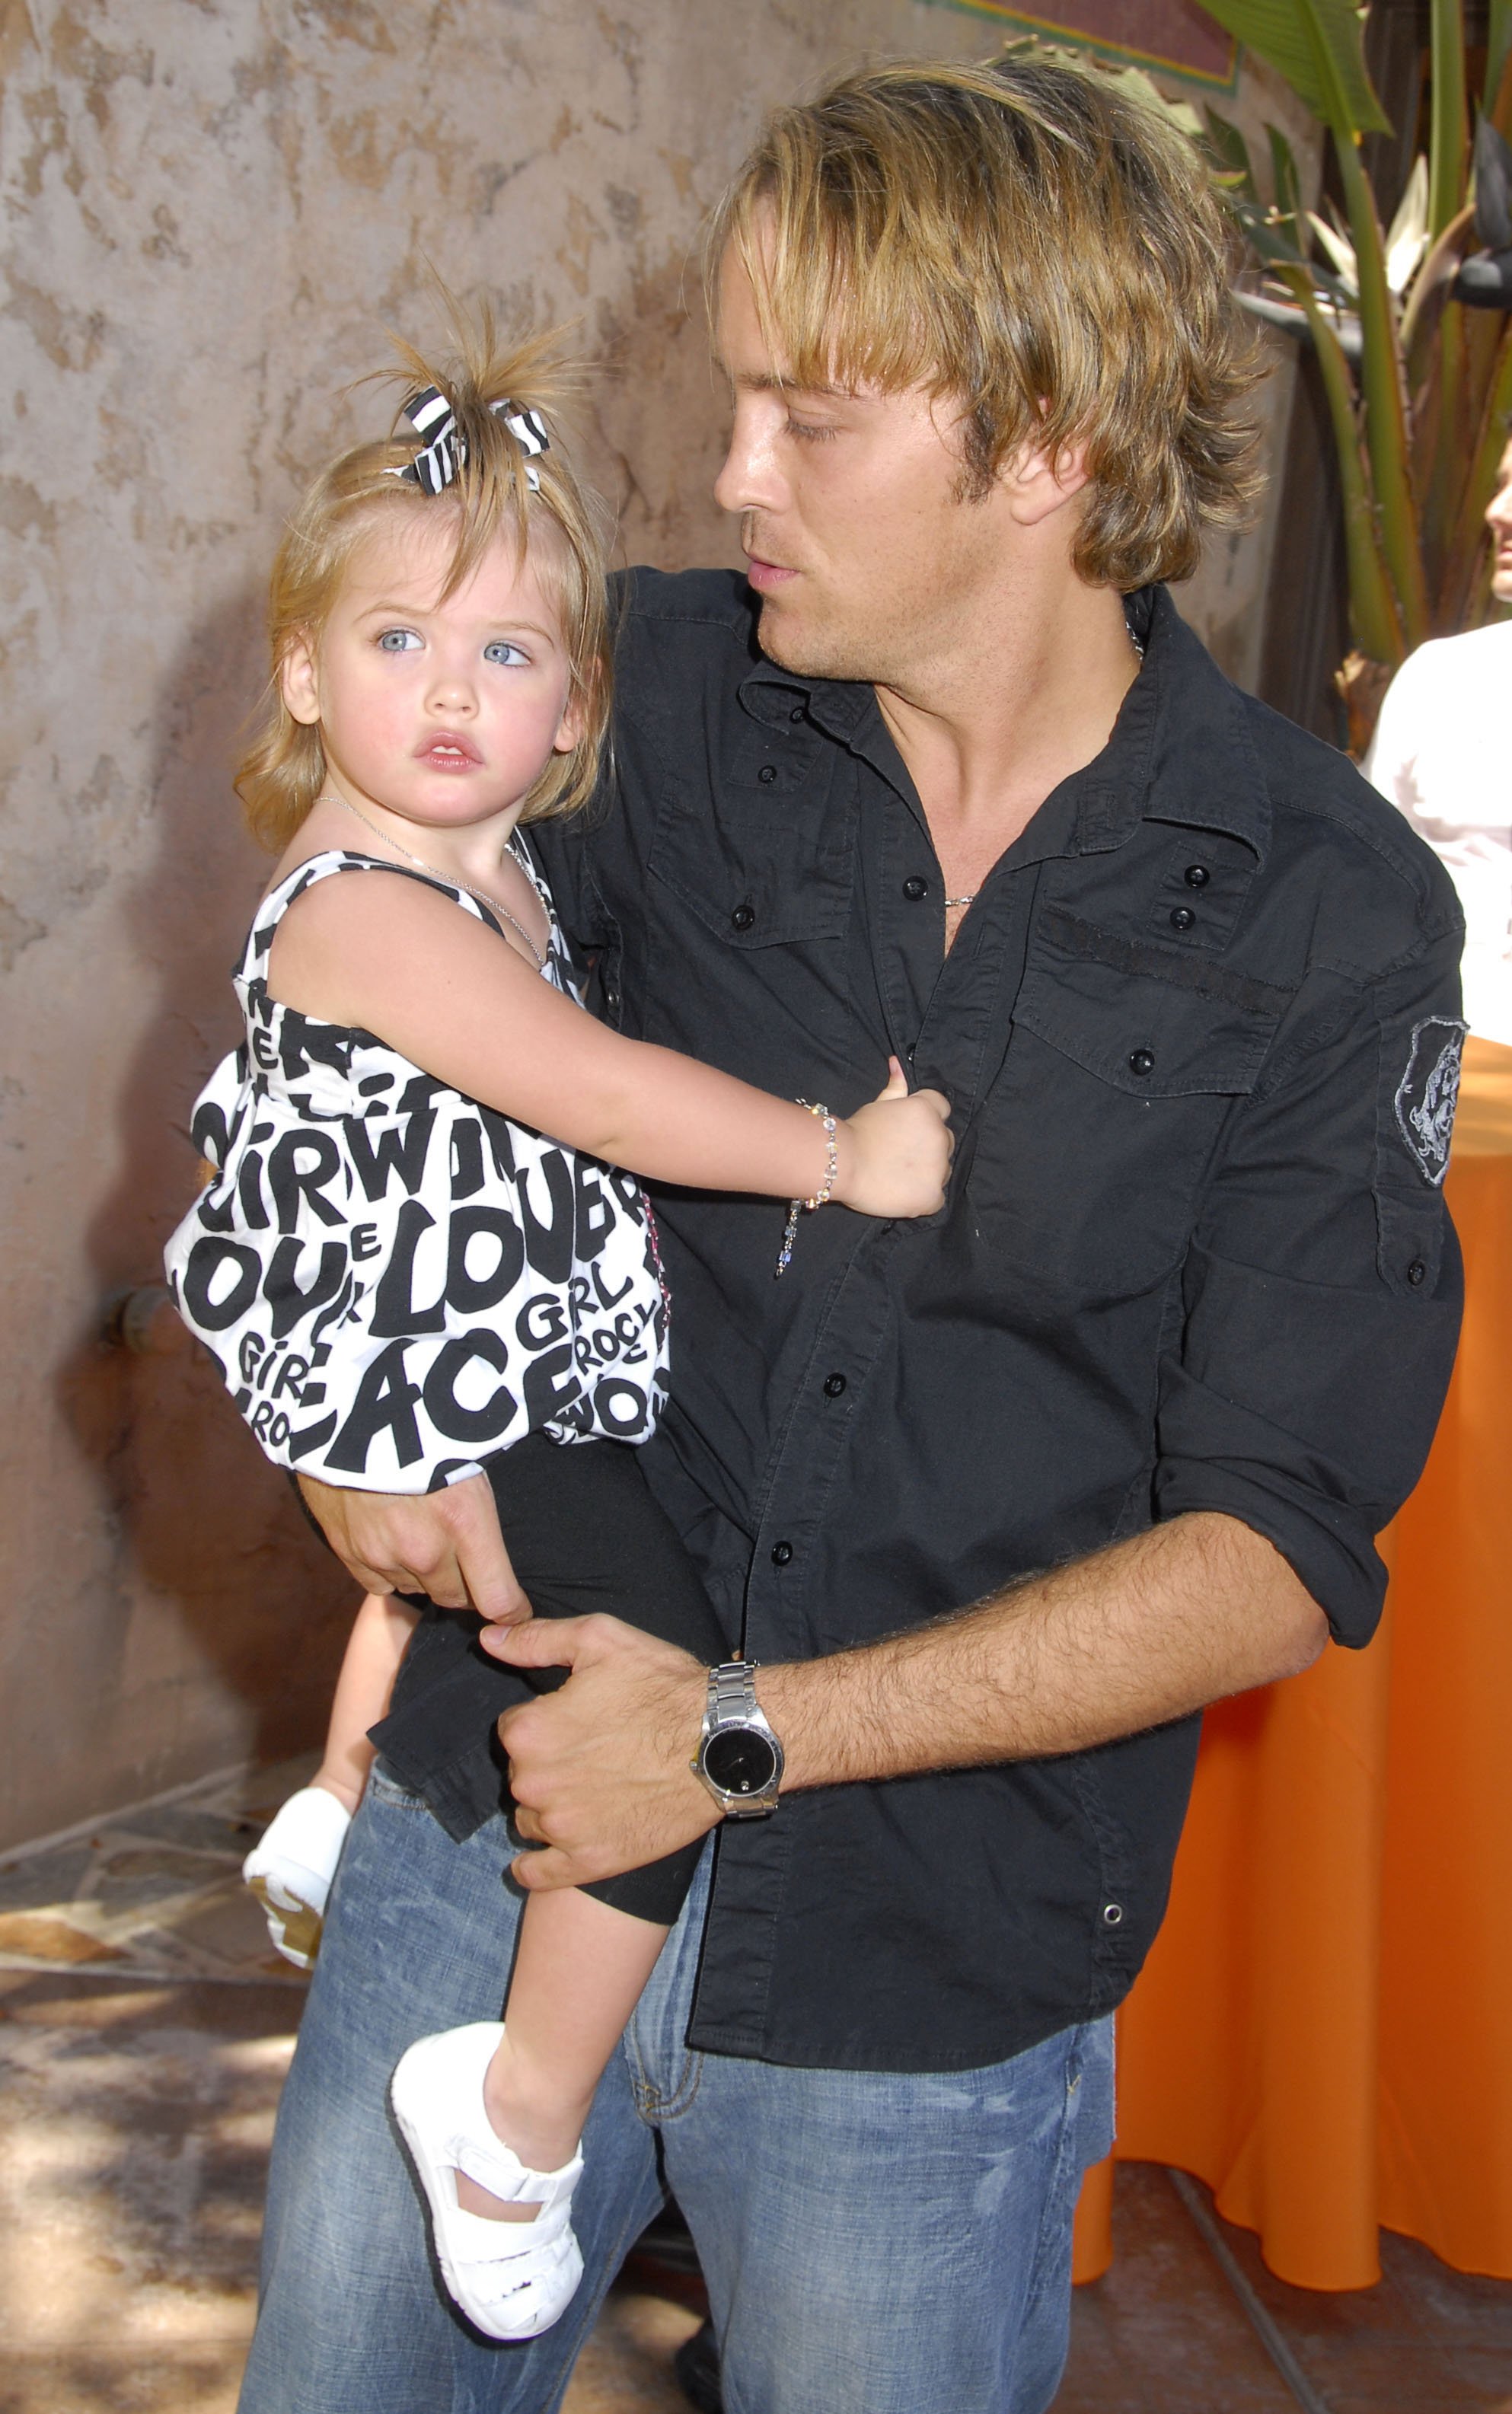 Dannielynn Smith and her father Larry Birkhead arriving at the Launch celebration party for The Simpson's Ride at Universal Studios Hollywood on May 17, 2008 in Universal City, California.┃Source: Getty Images